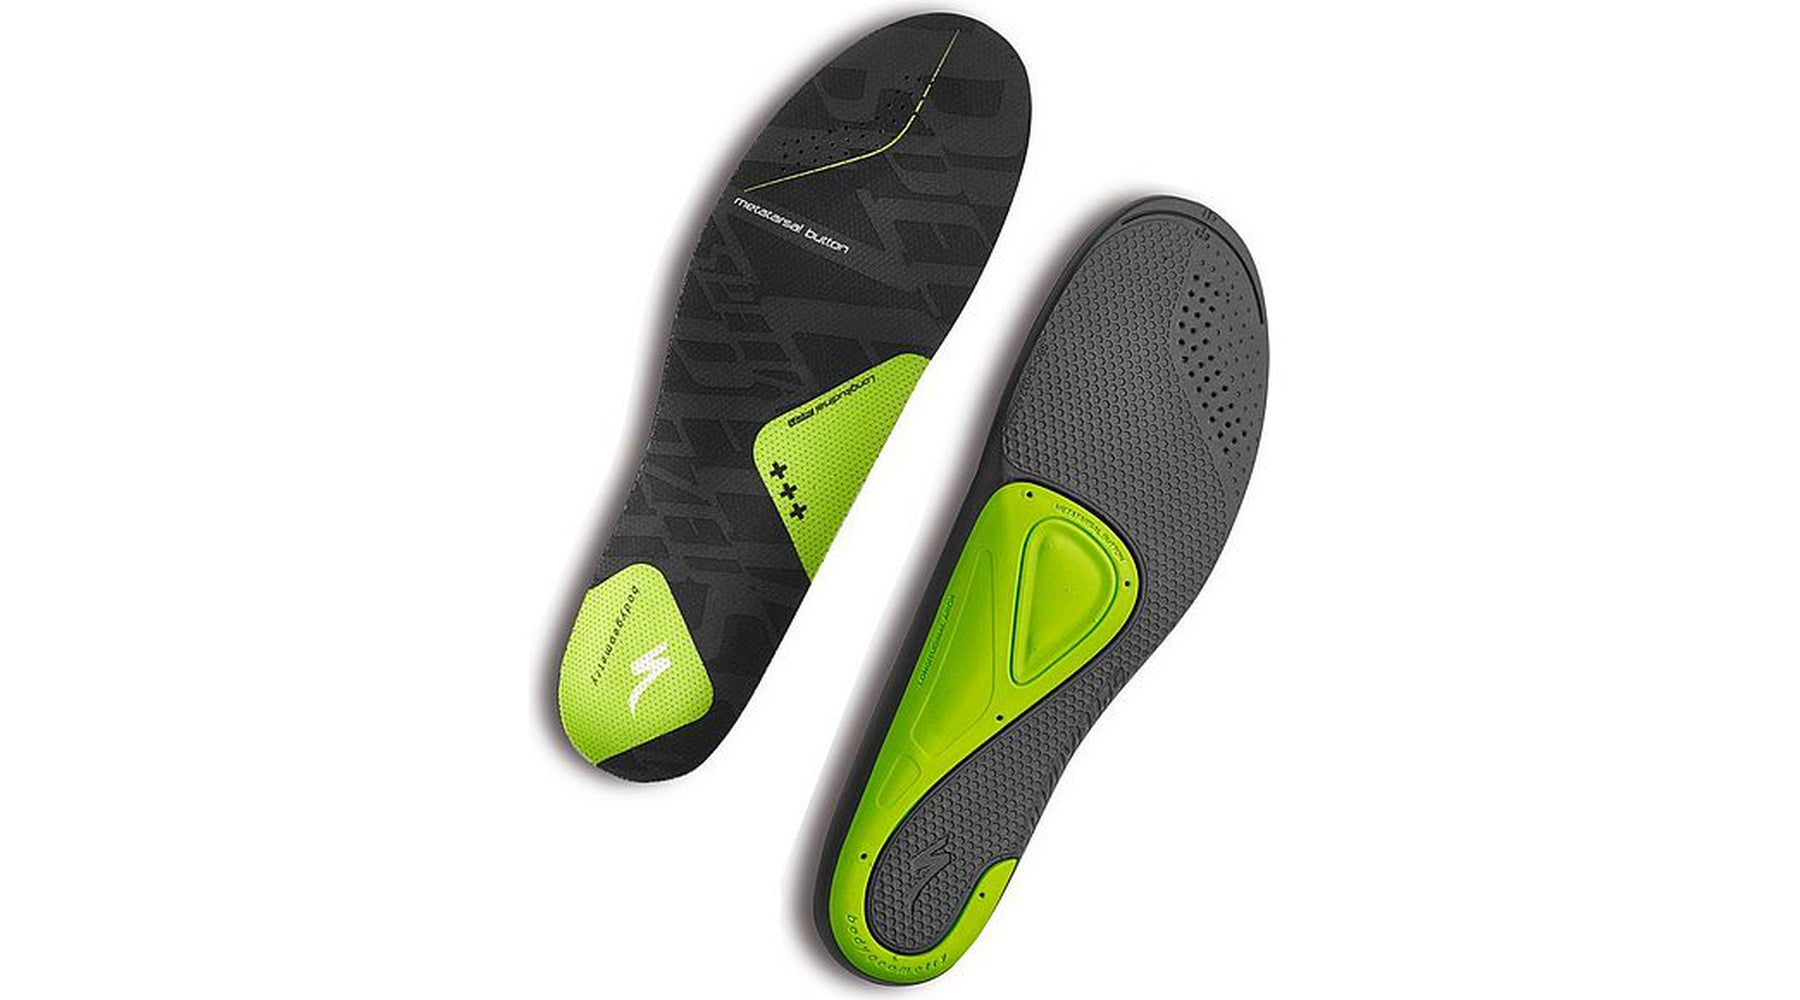 Body Geometry SL Footbeds | completecyclist - Body Geometry Footbeds are ergonomically designed and scientifically tested to increase power, endurance, and comfort by optimizing hip, knee, and foot